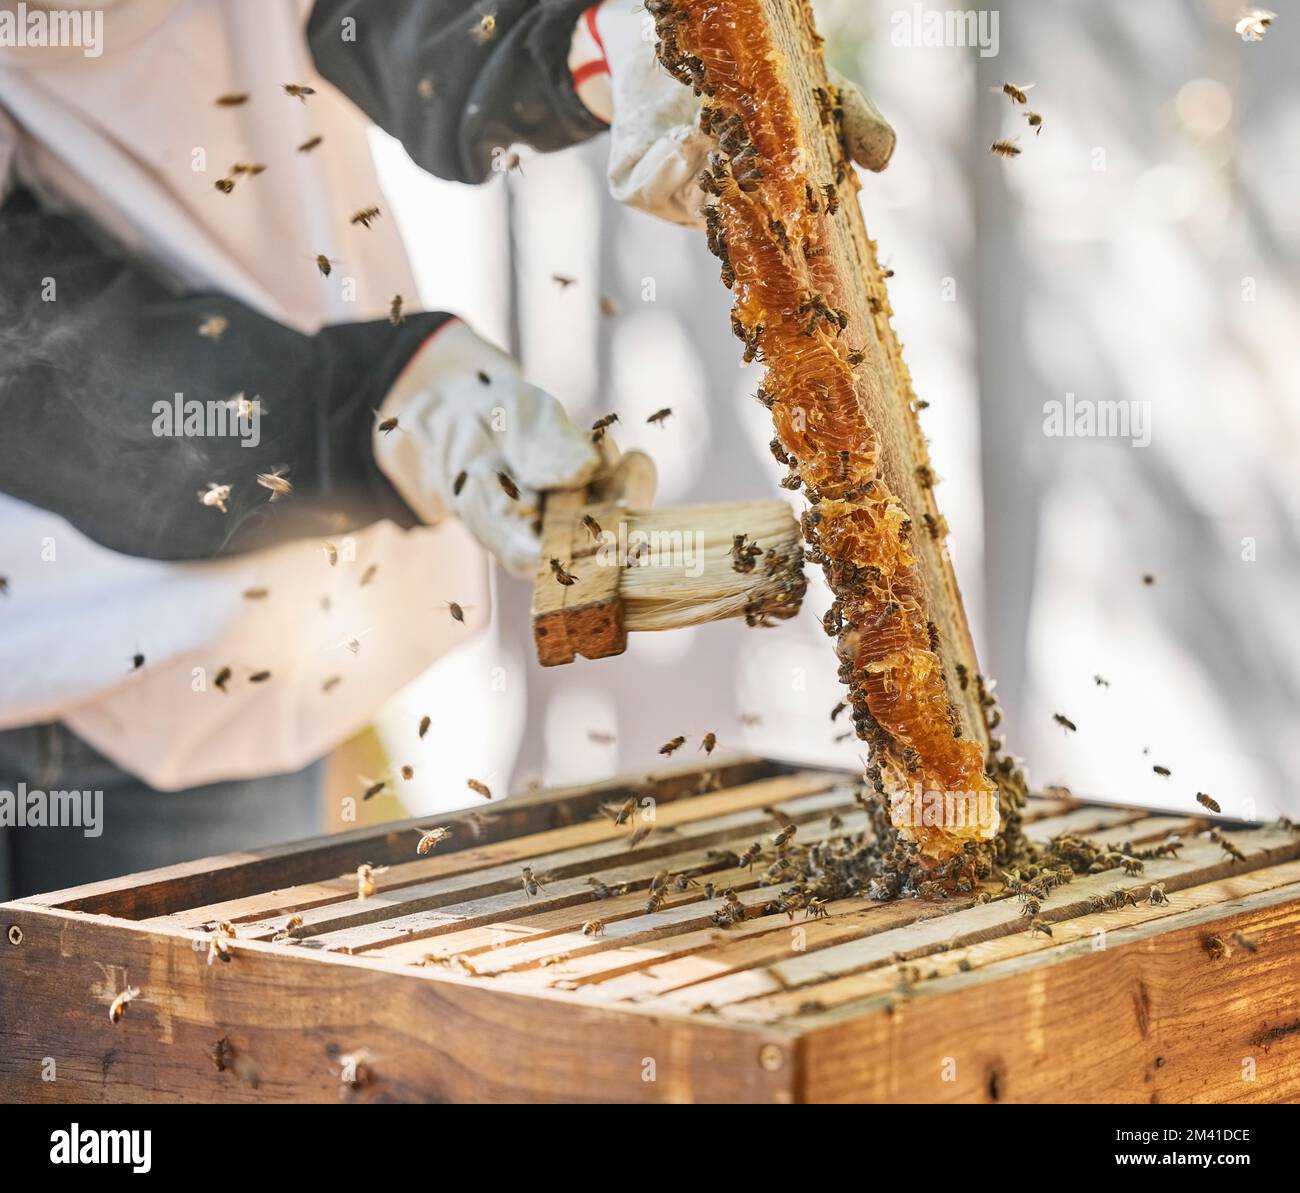 Farmer hands, beekeeper brush or honey box harvesting on sustainability agriculture land, countryside farm or healthy food location. Zoom, insect bees Stock Photo